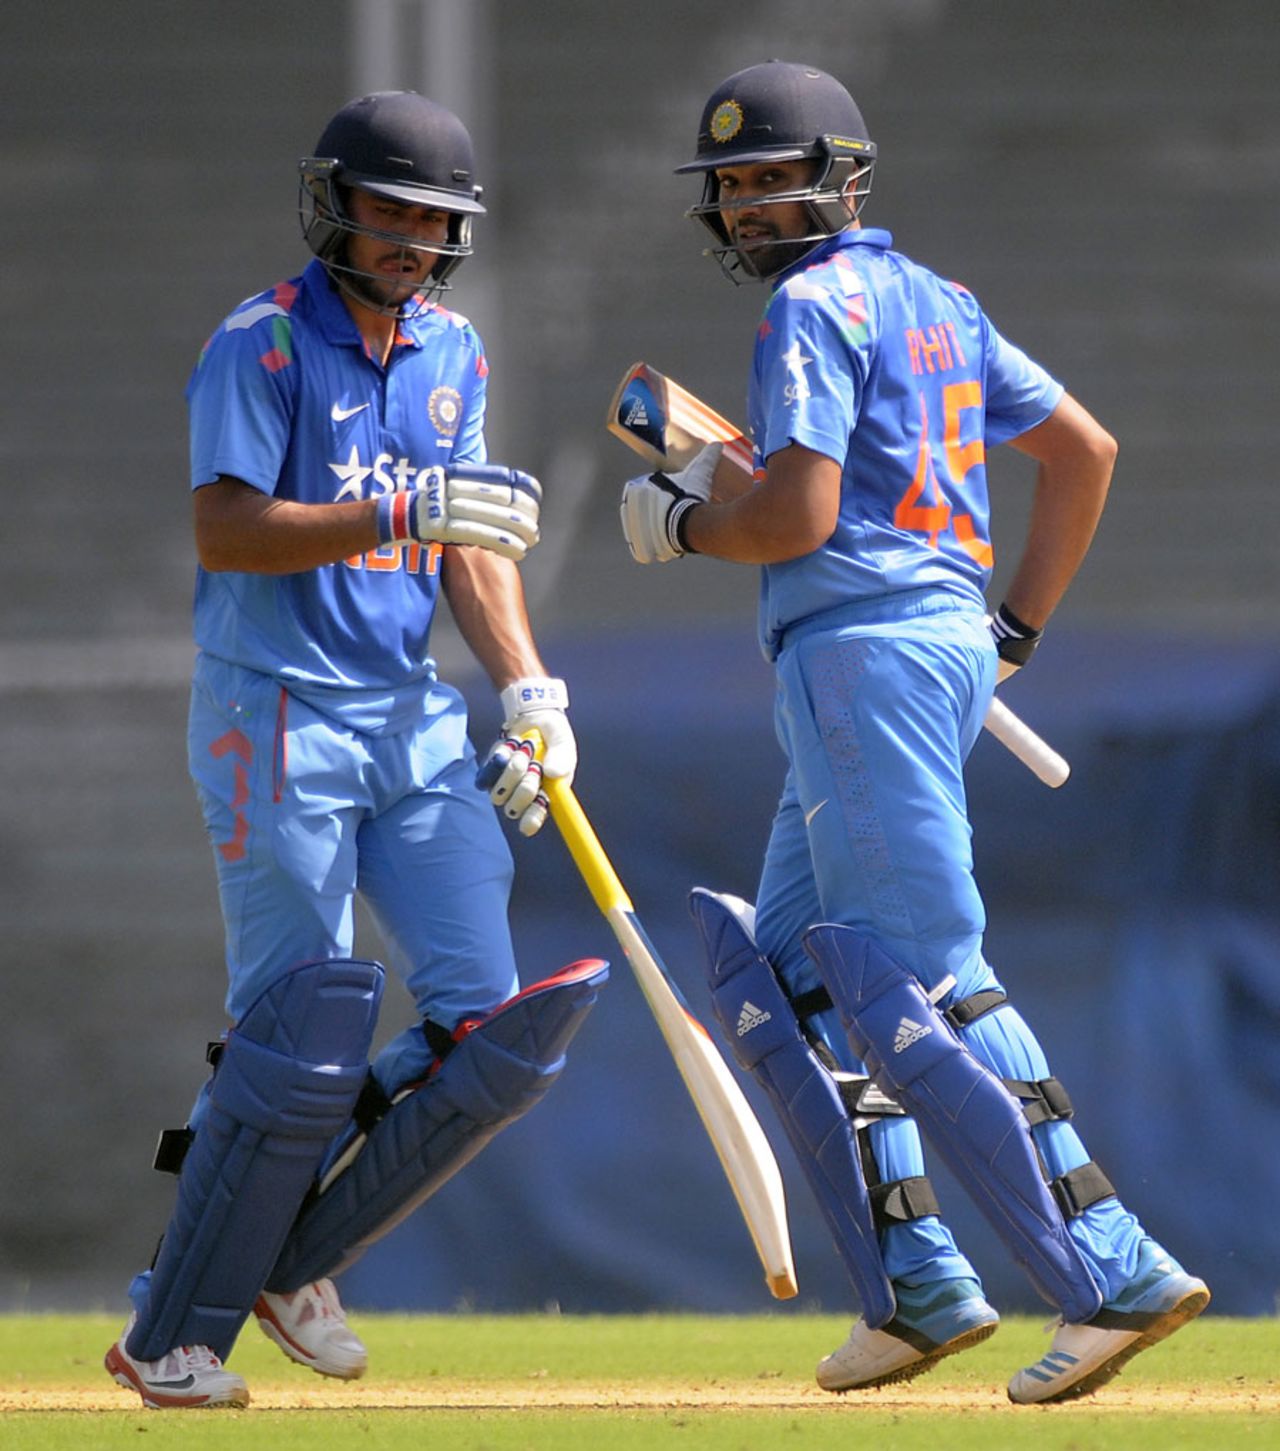 Manish Pandey and Rohit Sharma added 214 for the second wicket, Indians v Sri Lanka A, one-dayer, Mumbai, October 30, 2014